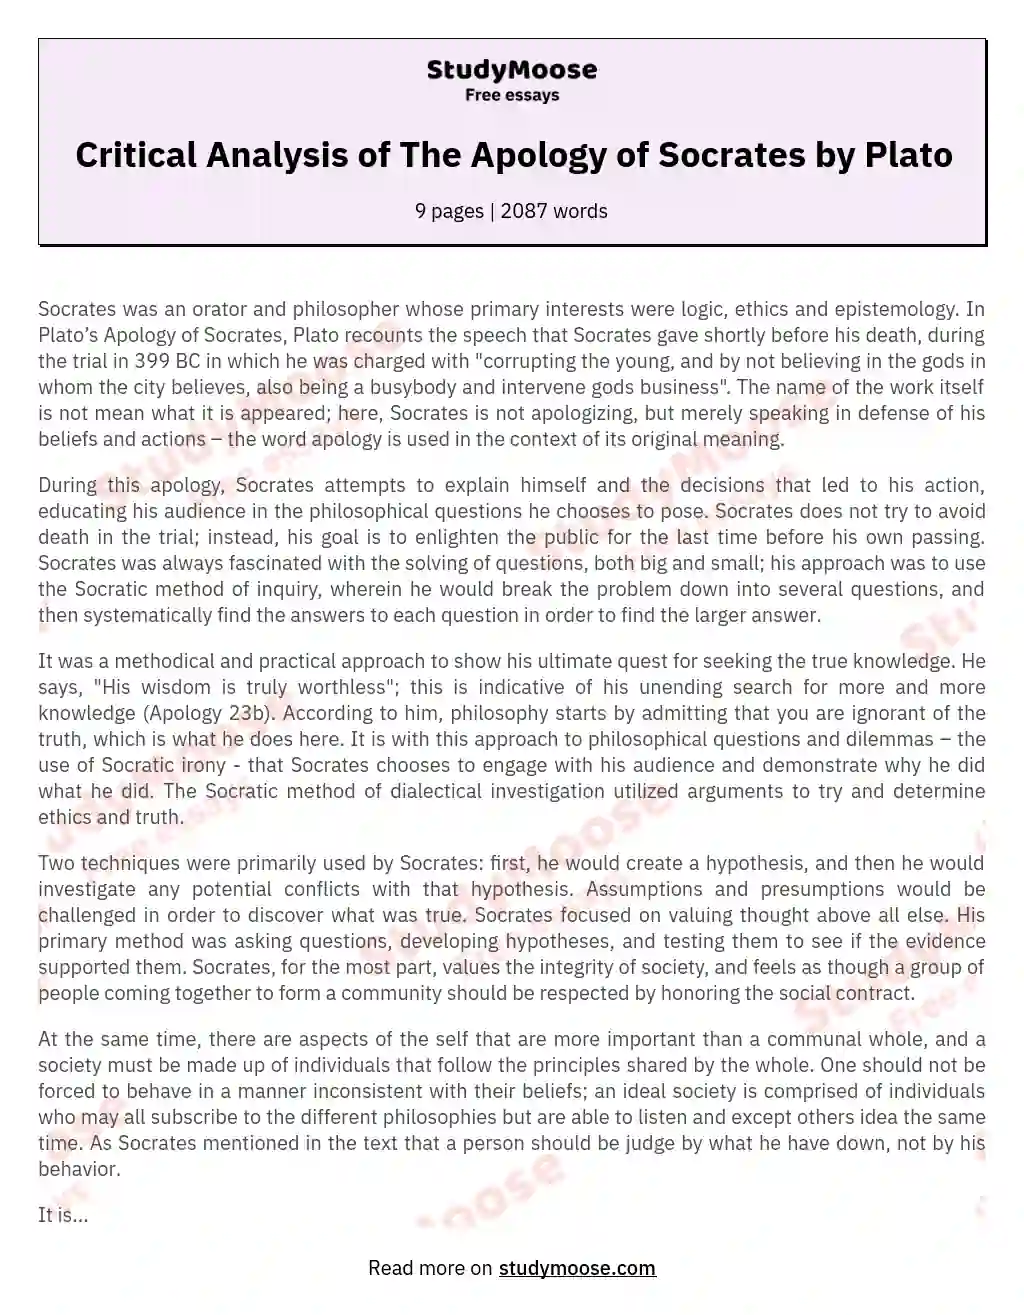 Critical Analysis of The Apology of Socrates by Plato essay